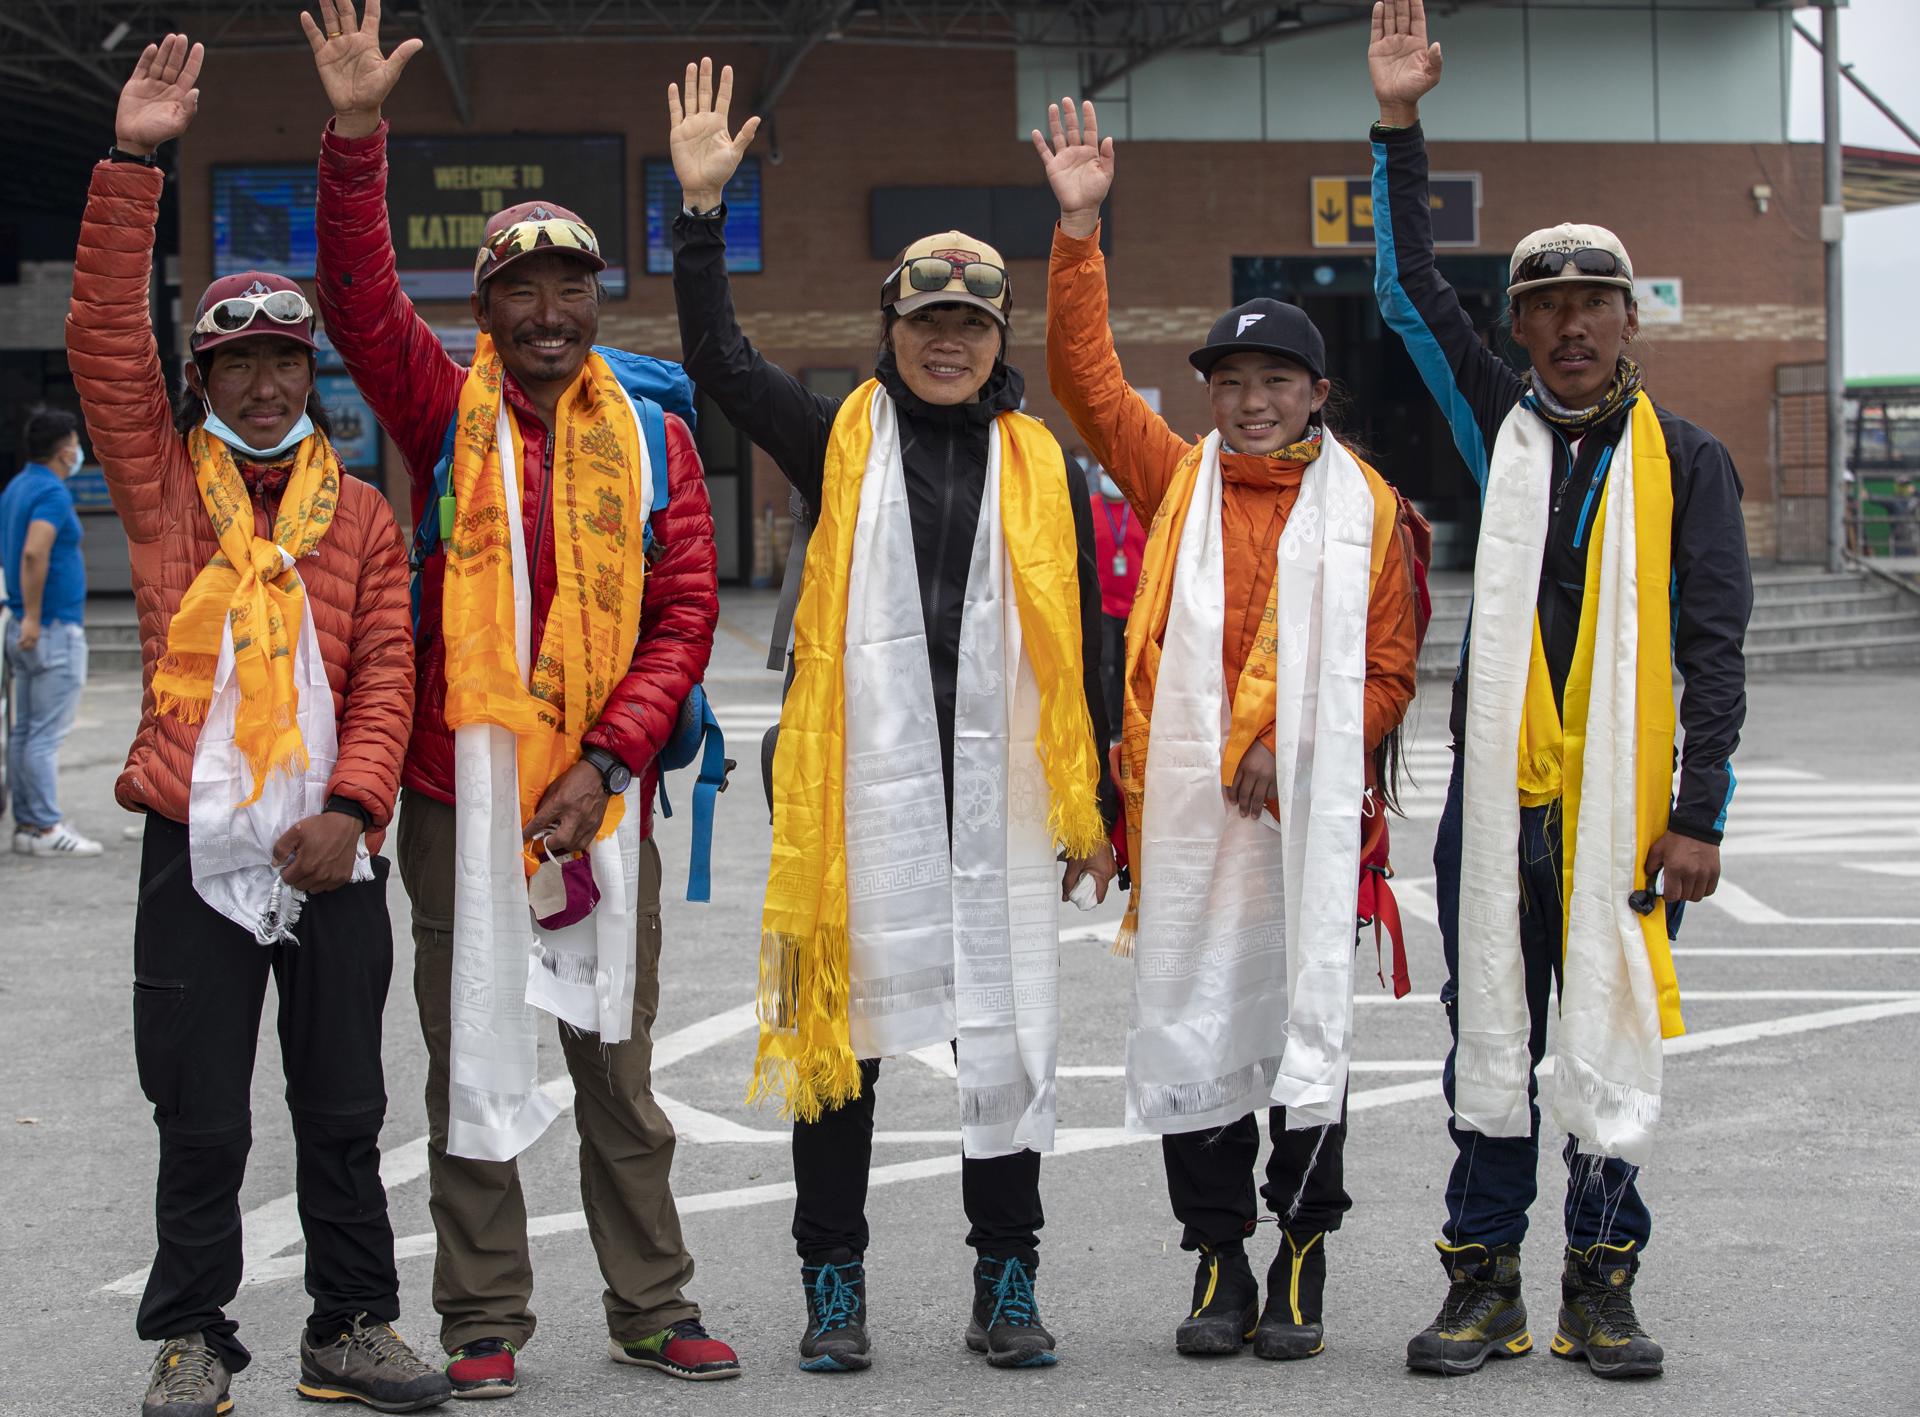 (FILE) Hong Kong climber Tsang Yin-hung (C) waves along with her expedition team members upon her arrival from Everest base camp in Kathmandu, Nepal, 30 May 2021. EFE/EPA/NARENDRA SHRESTHA